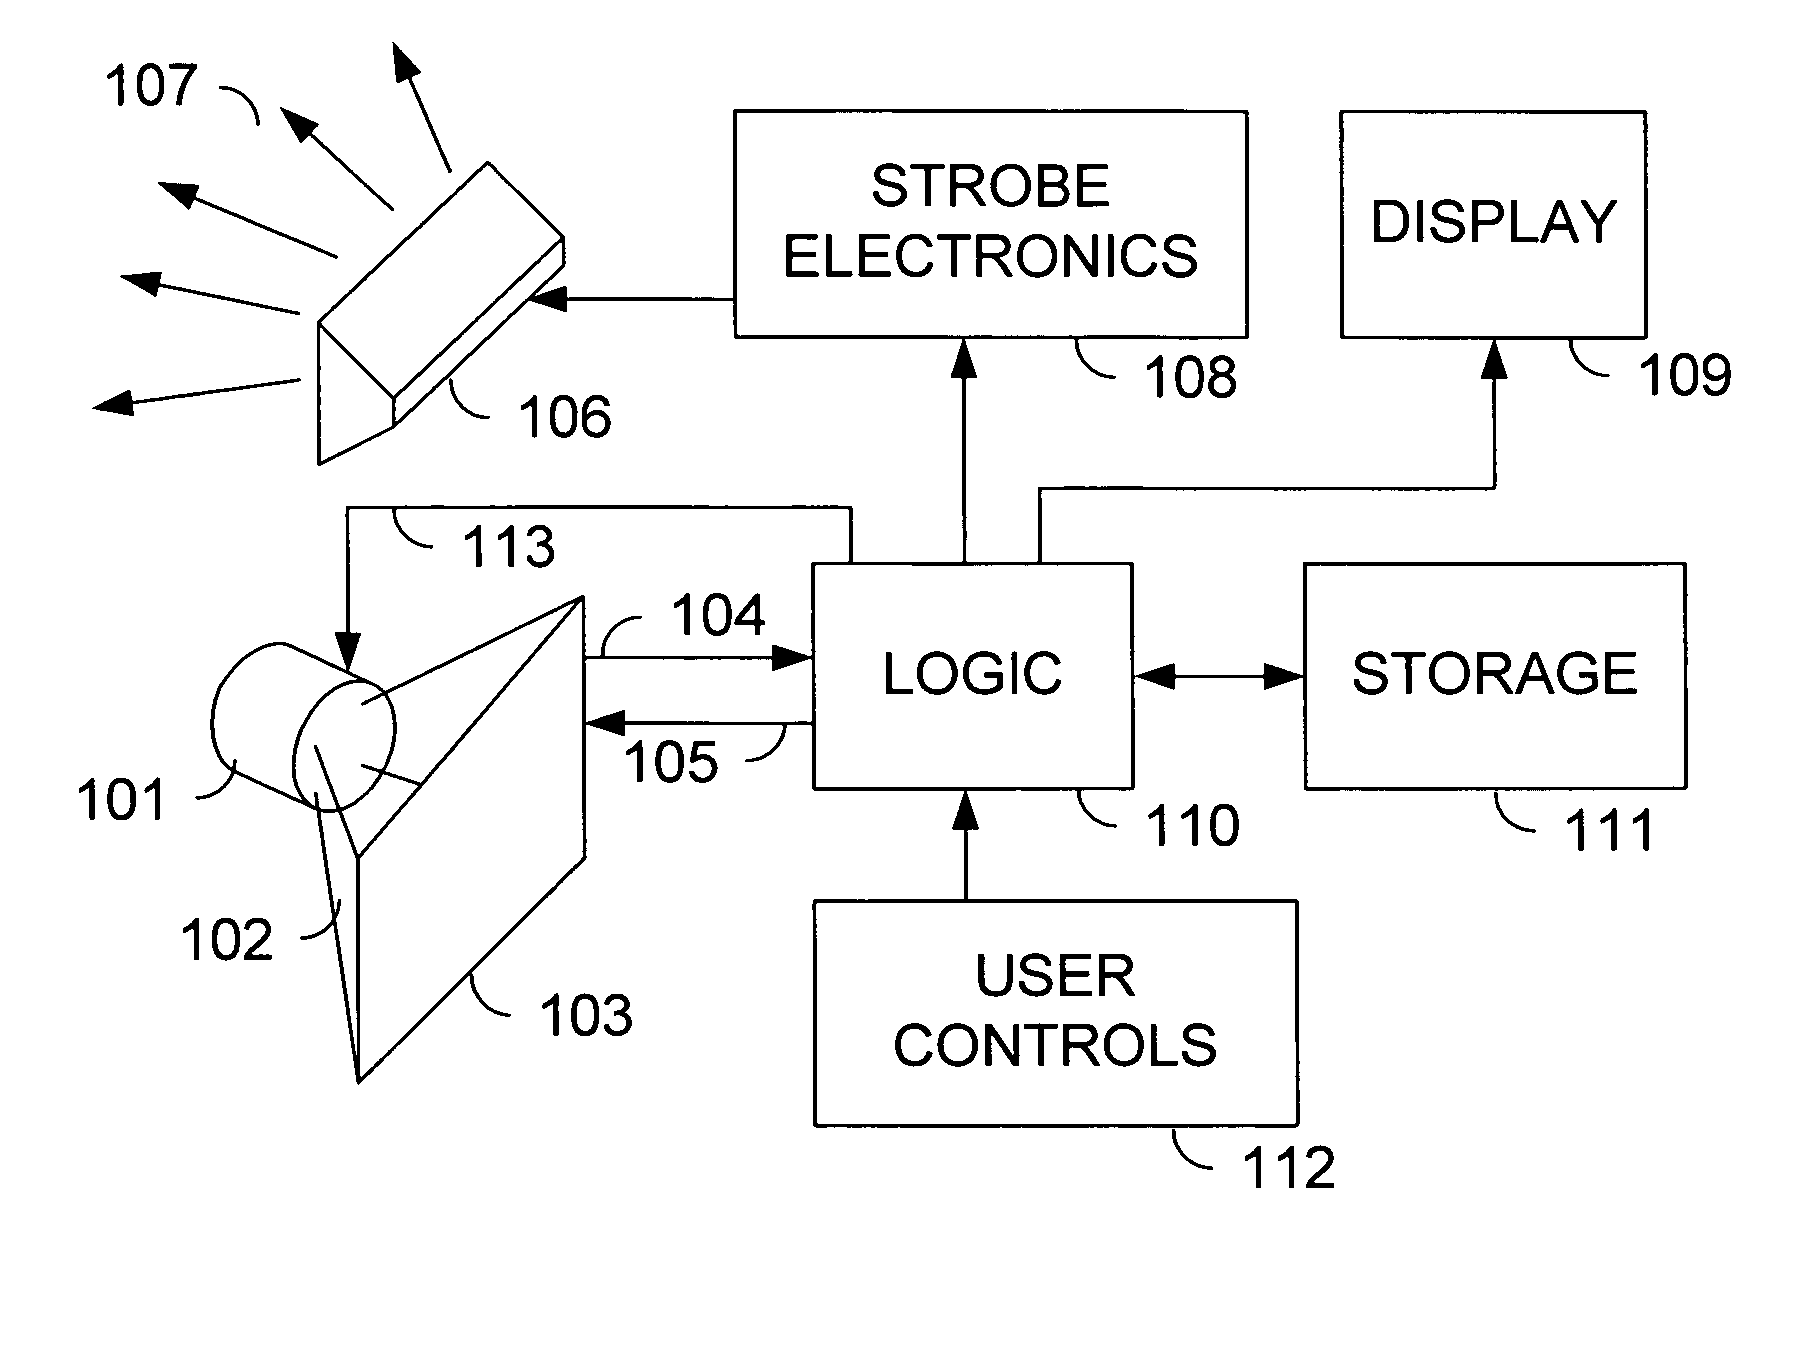 Method of compensating for an effect of temperature on a control system